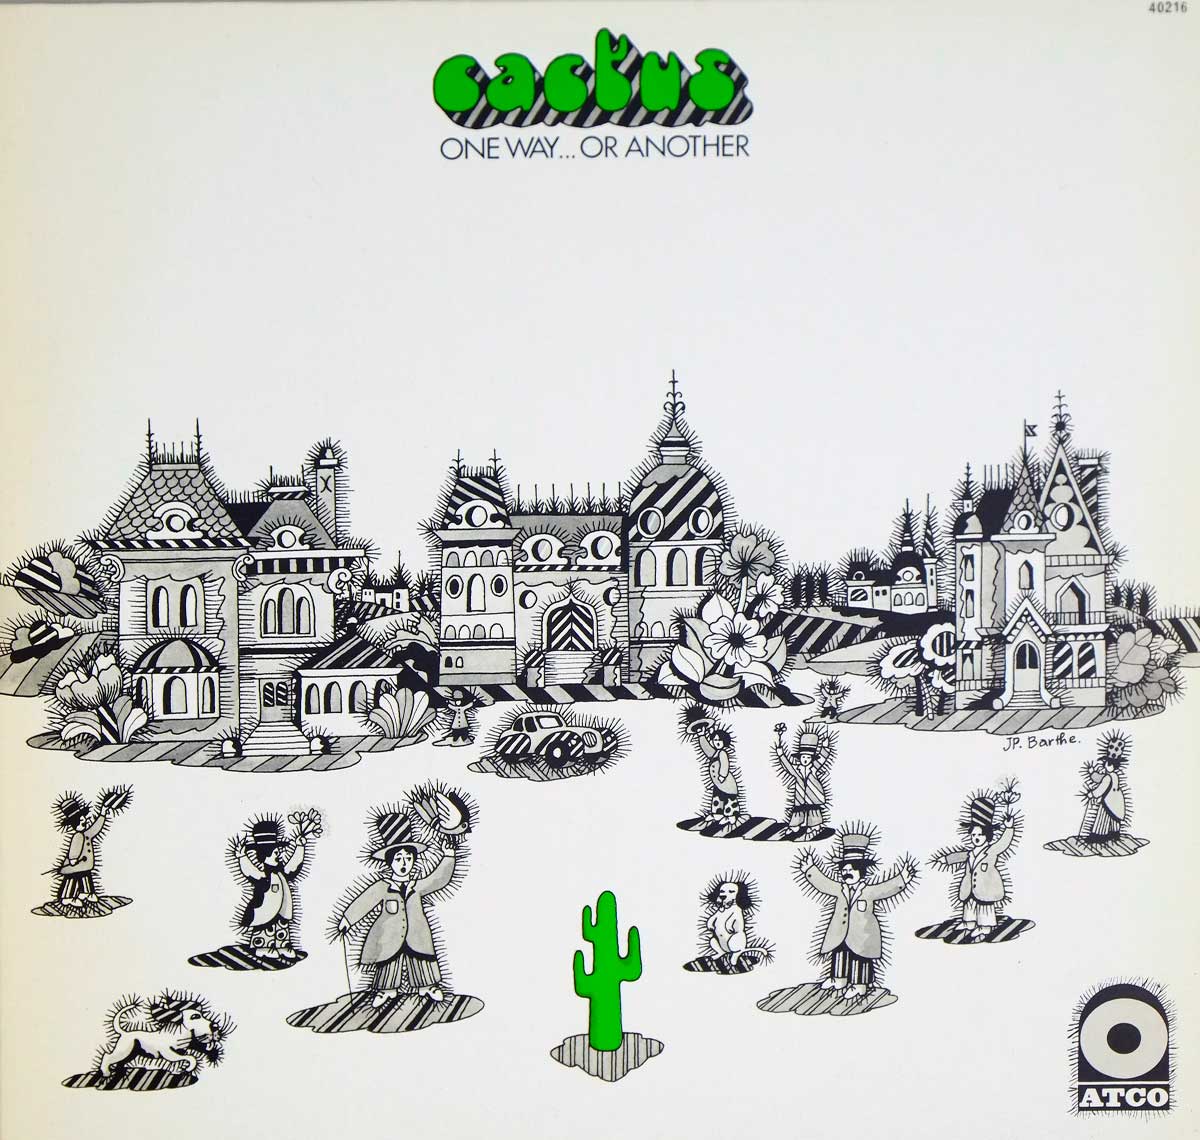 Album Front cover Photo of CACTUS - One Way or Another France https://vinyl-records.nl/